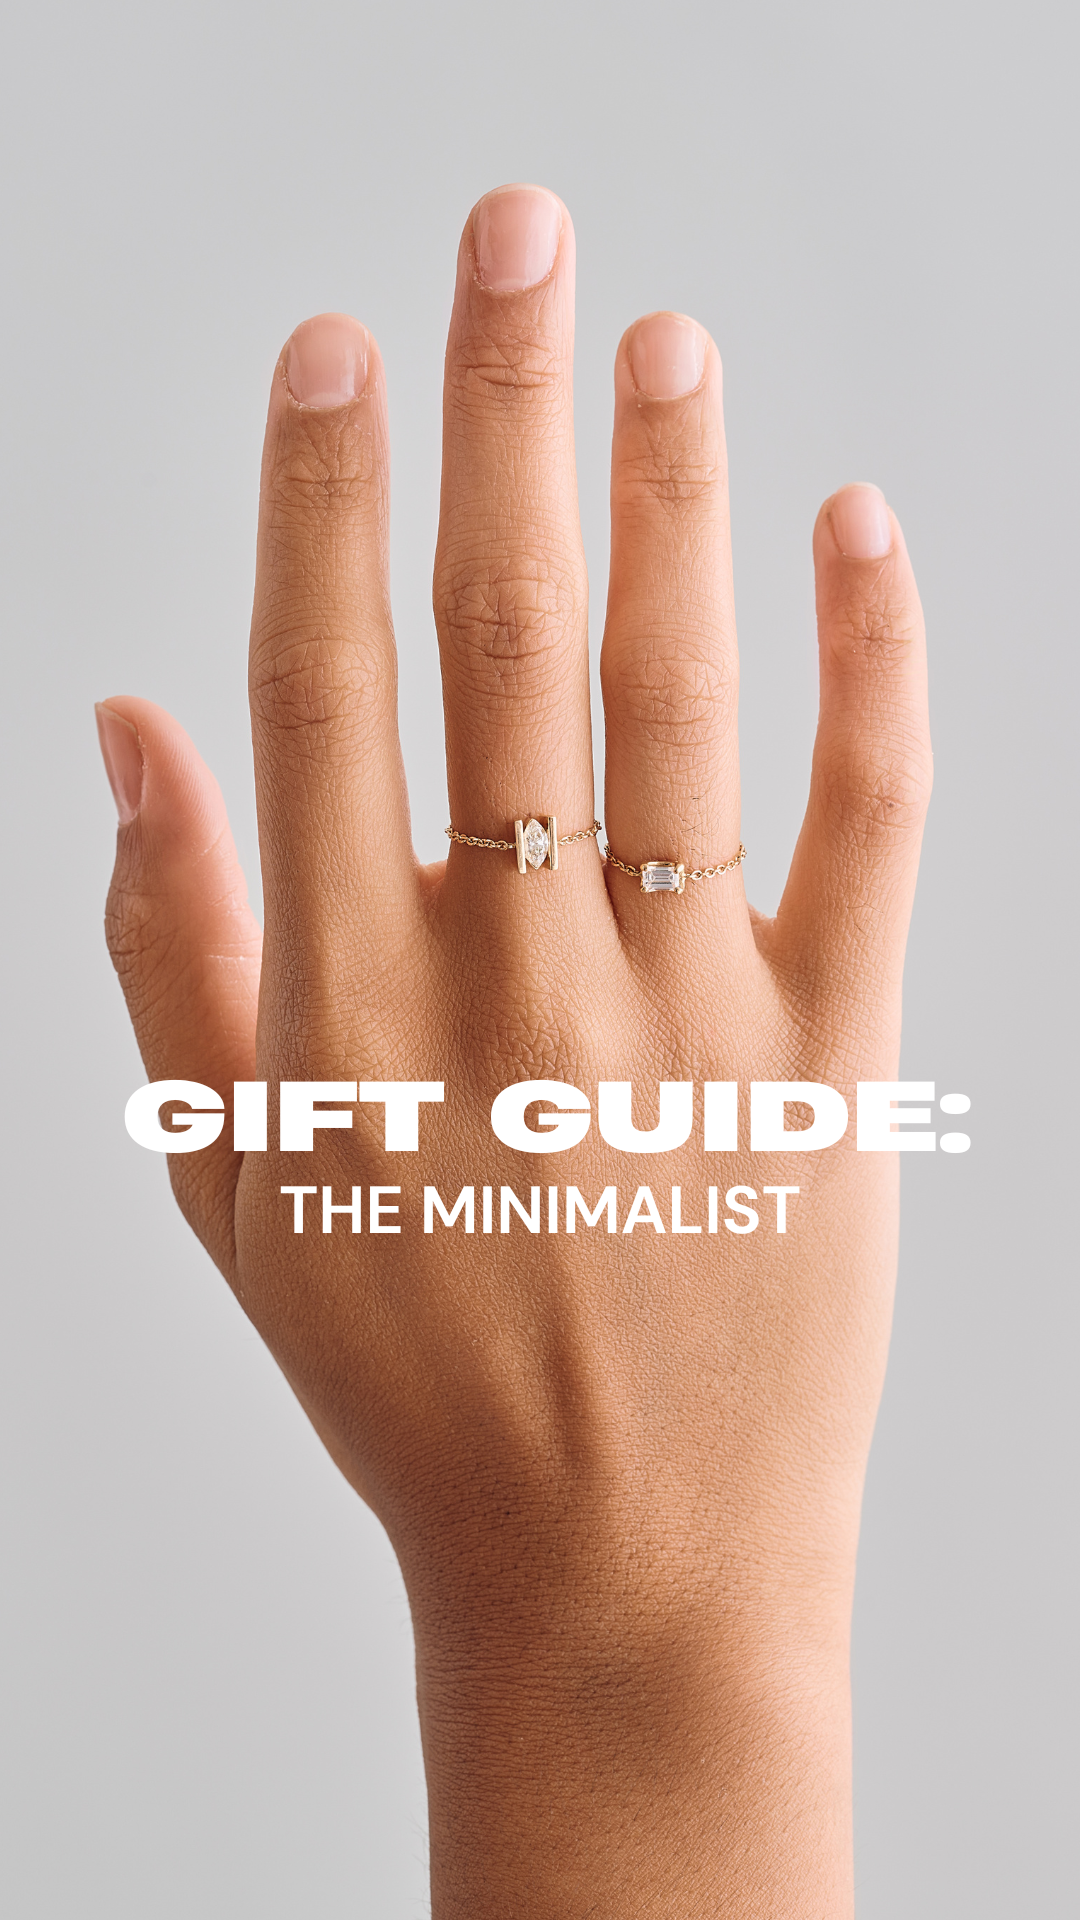 Gift Guide: The Minimalist